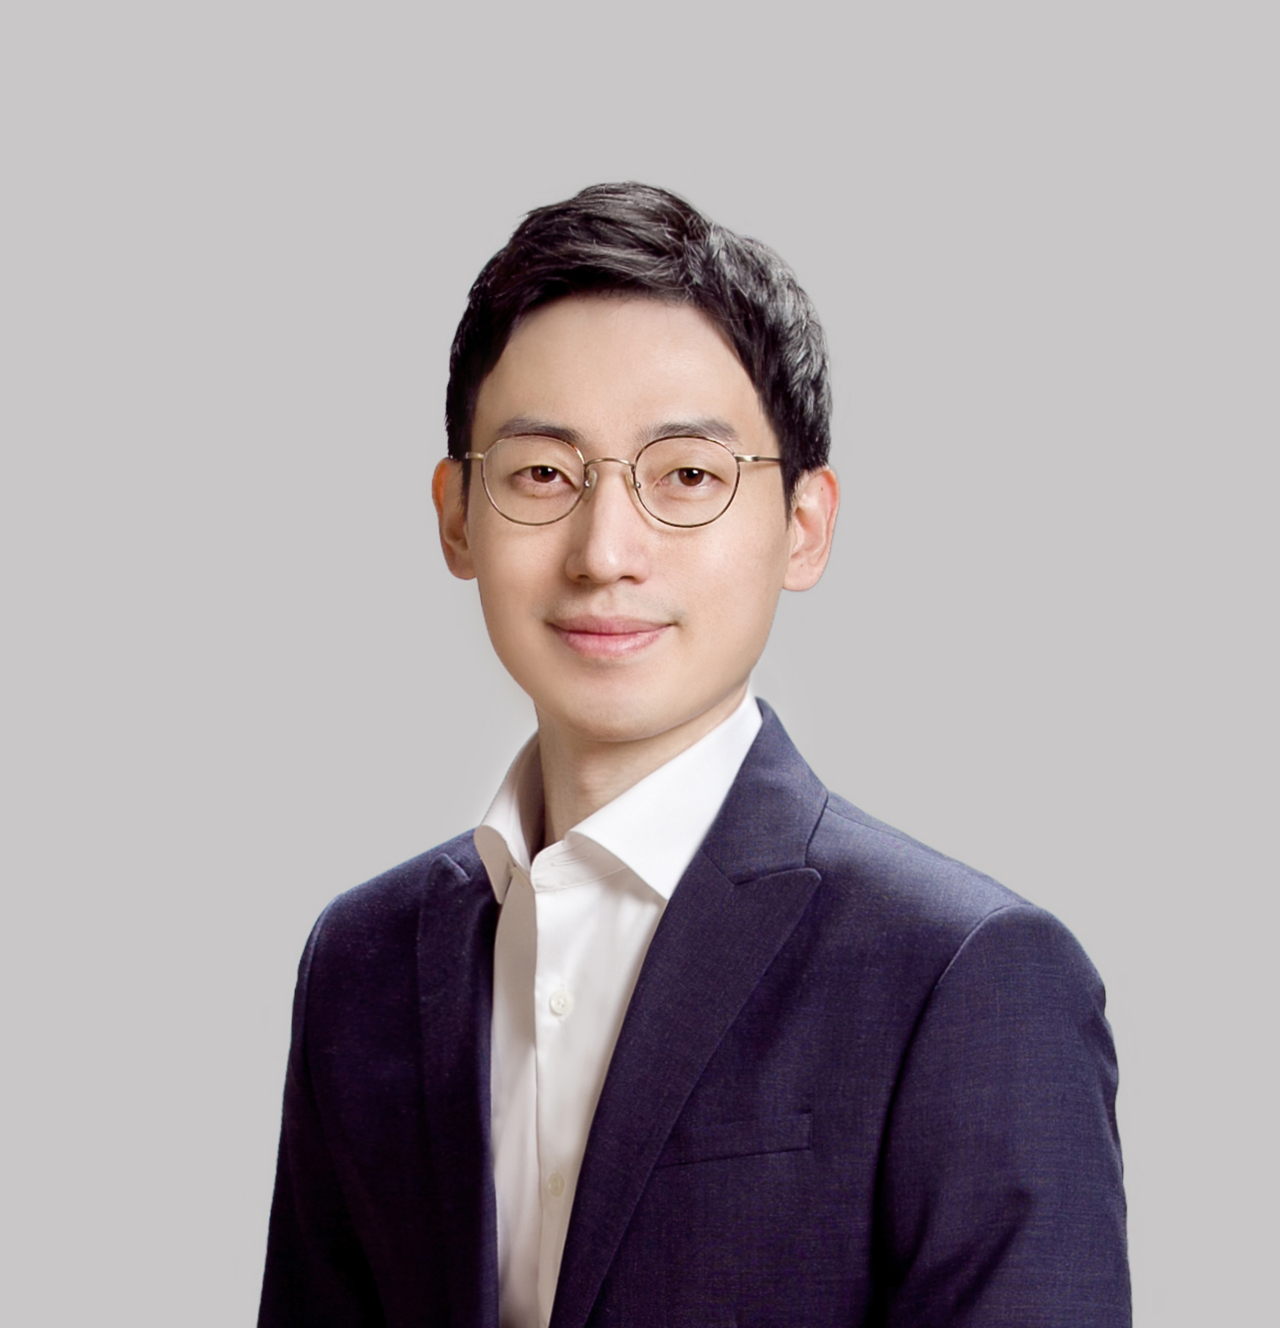 Newly appointed CEO of WeMakePrice Ha Song (WeMakePrice)